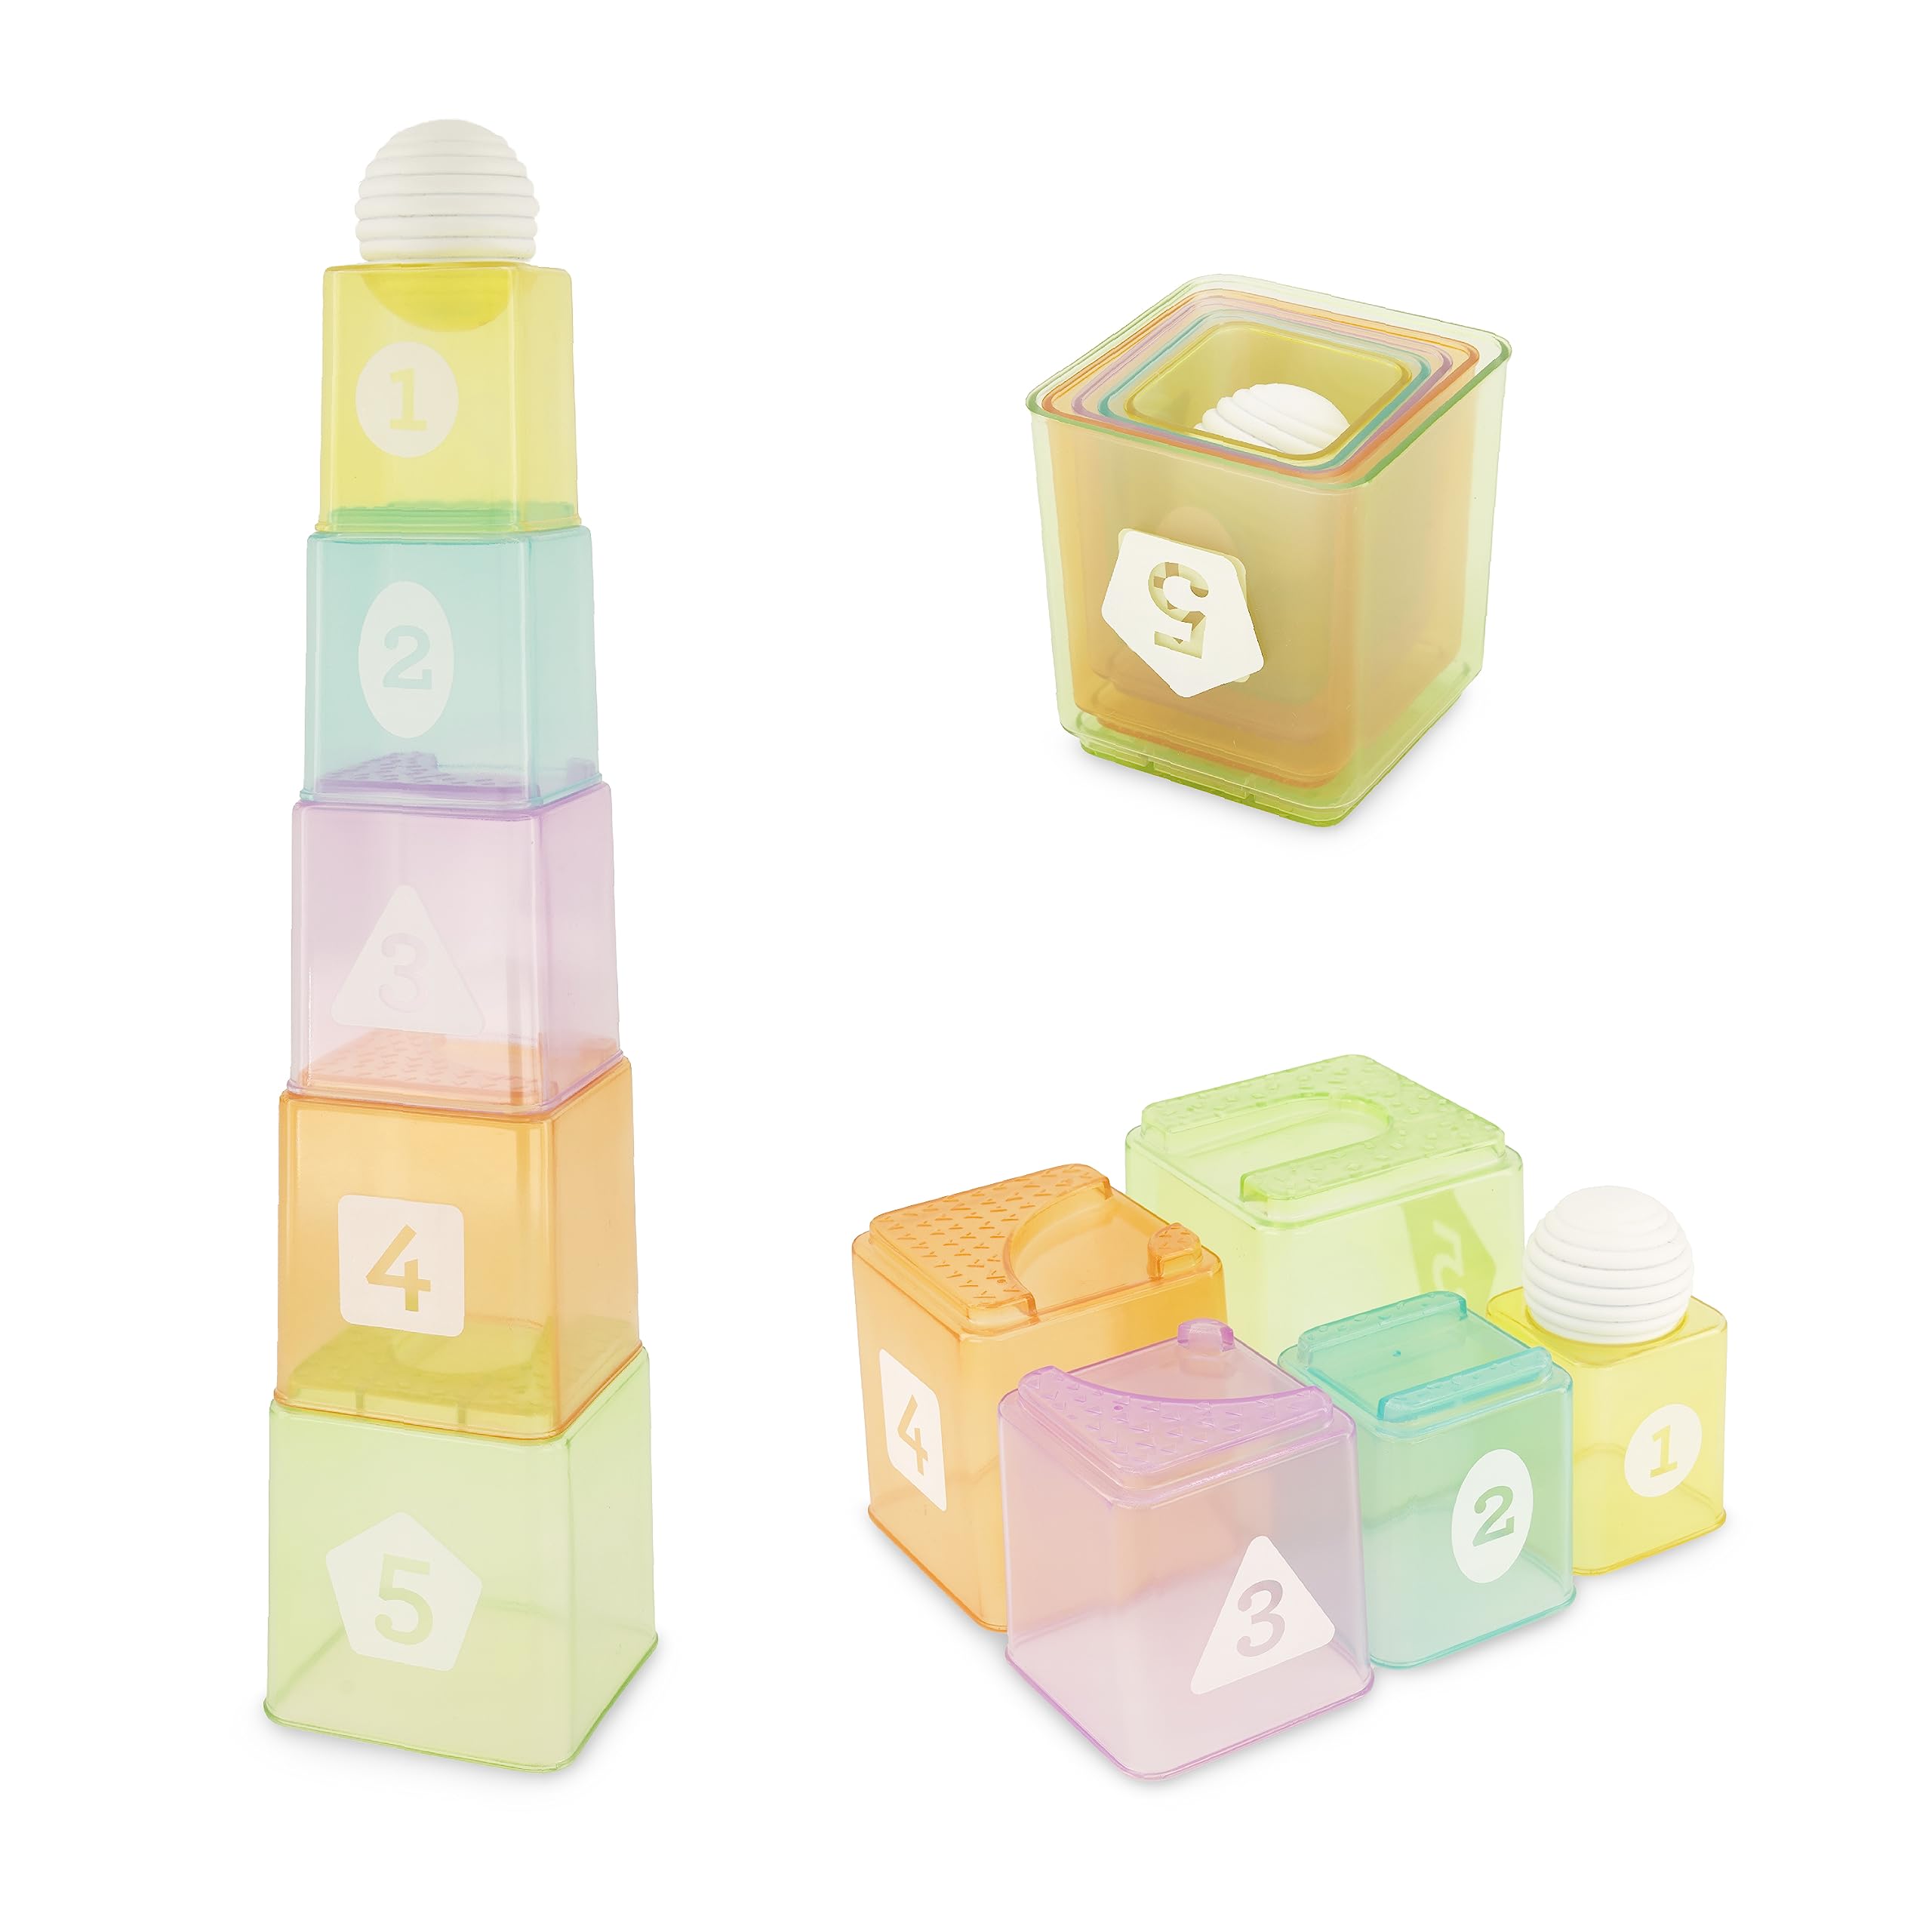 Infantino Cups & Ball Learning Set, Multicolor 6 Piece Set - Includes 1 Ball, 5 Stack & Build Cups, Ages 6 Months+